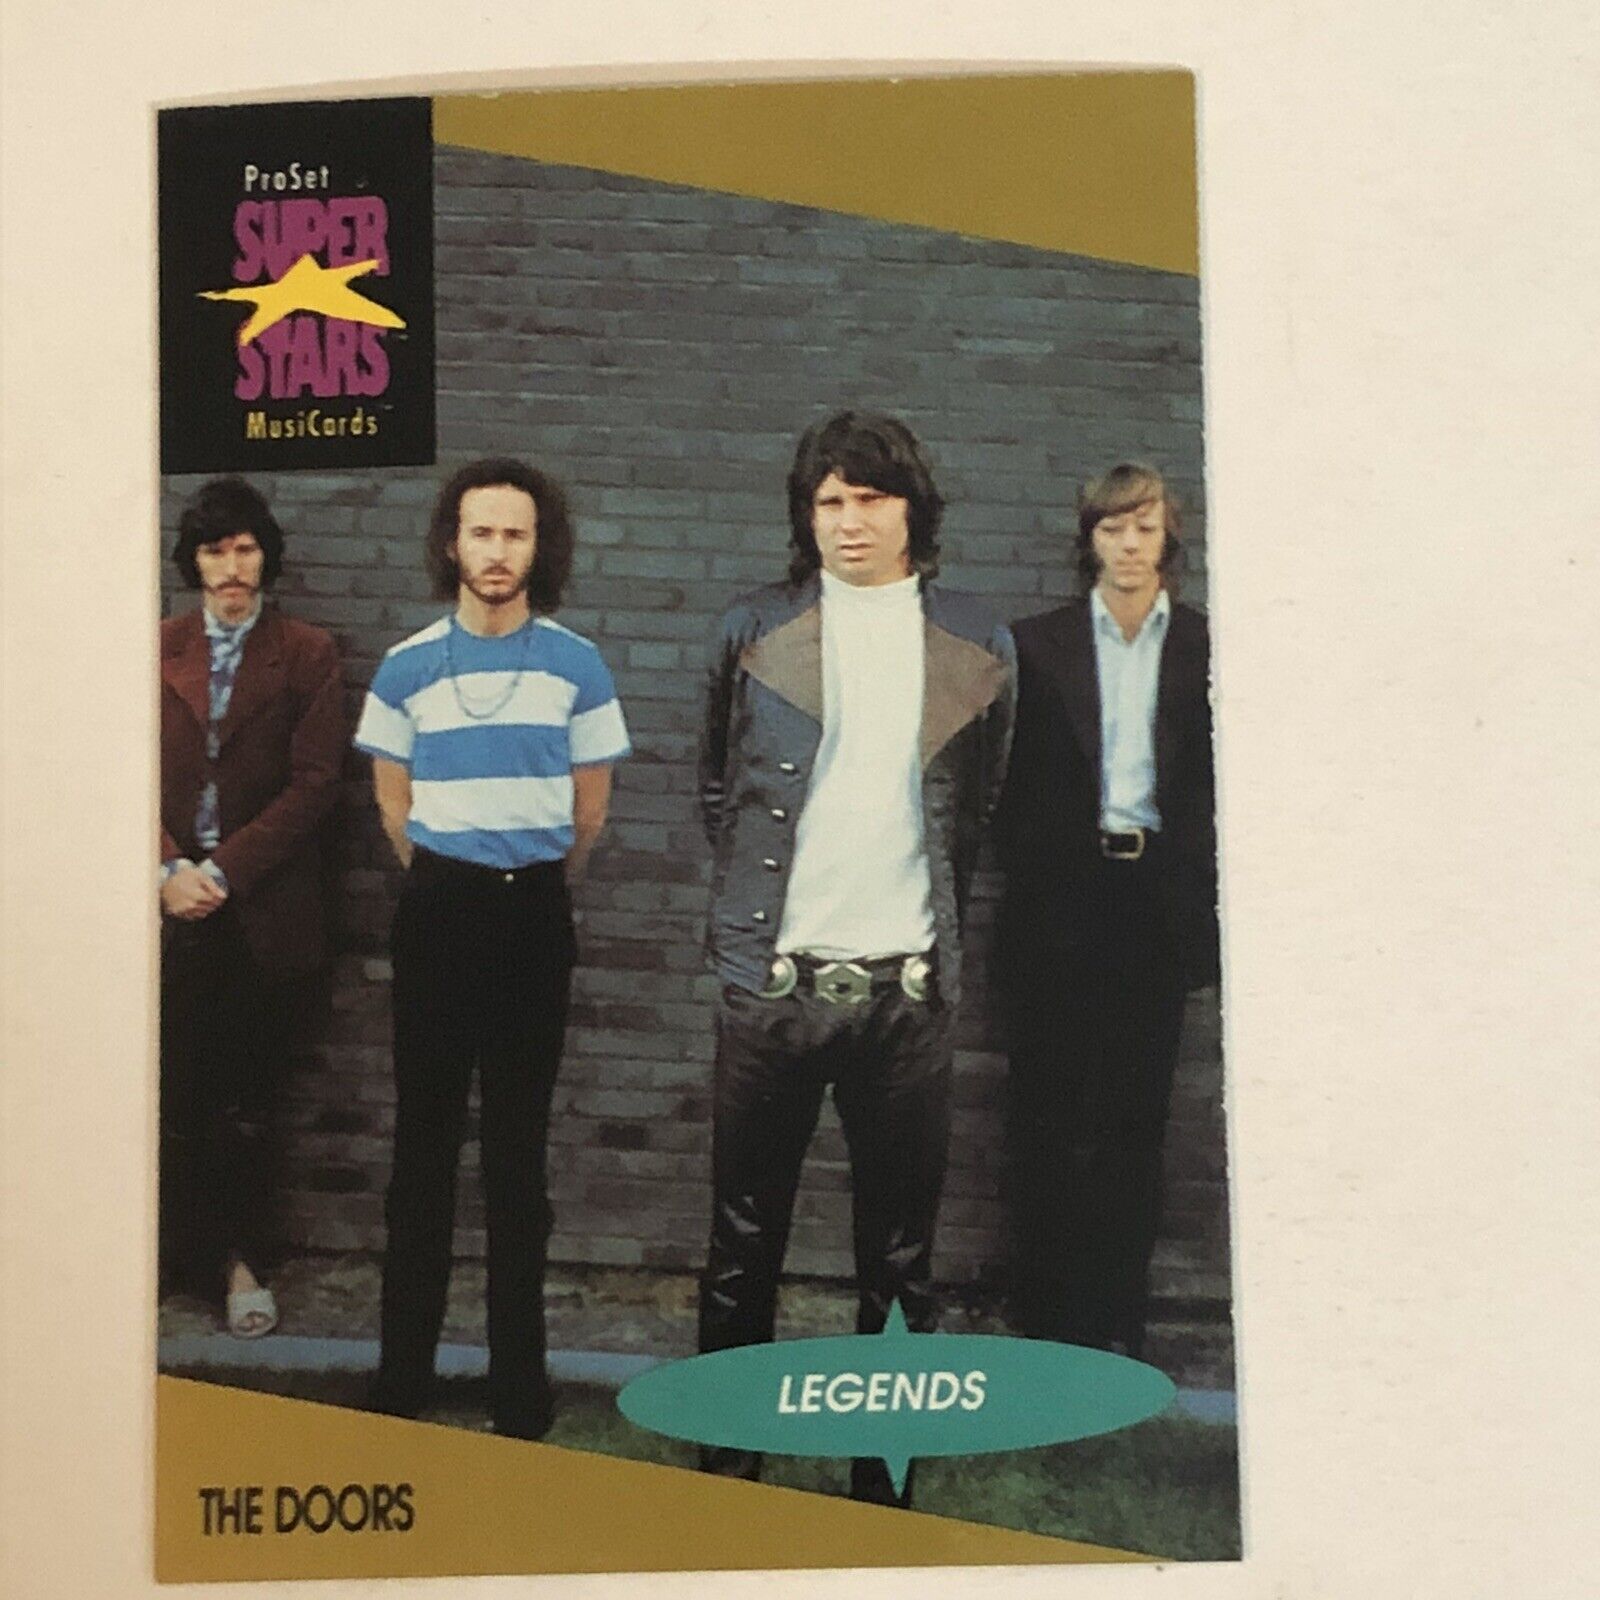 The Doors Trading Card Musicards Super Stars #9